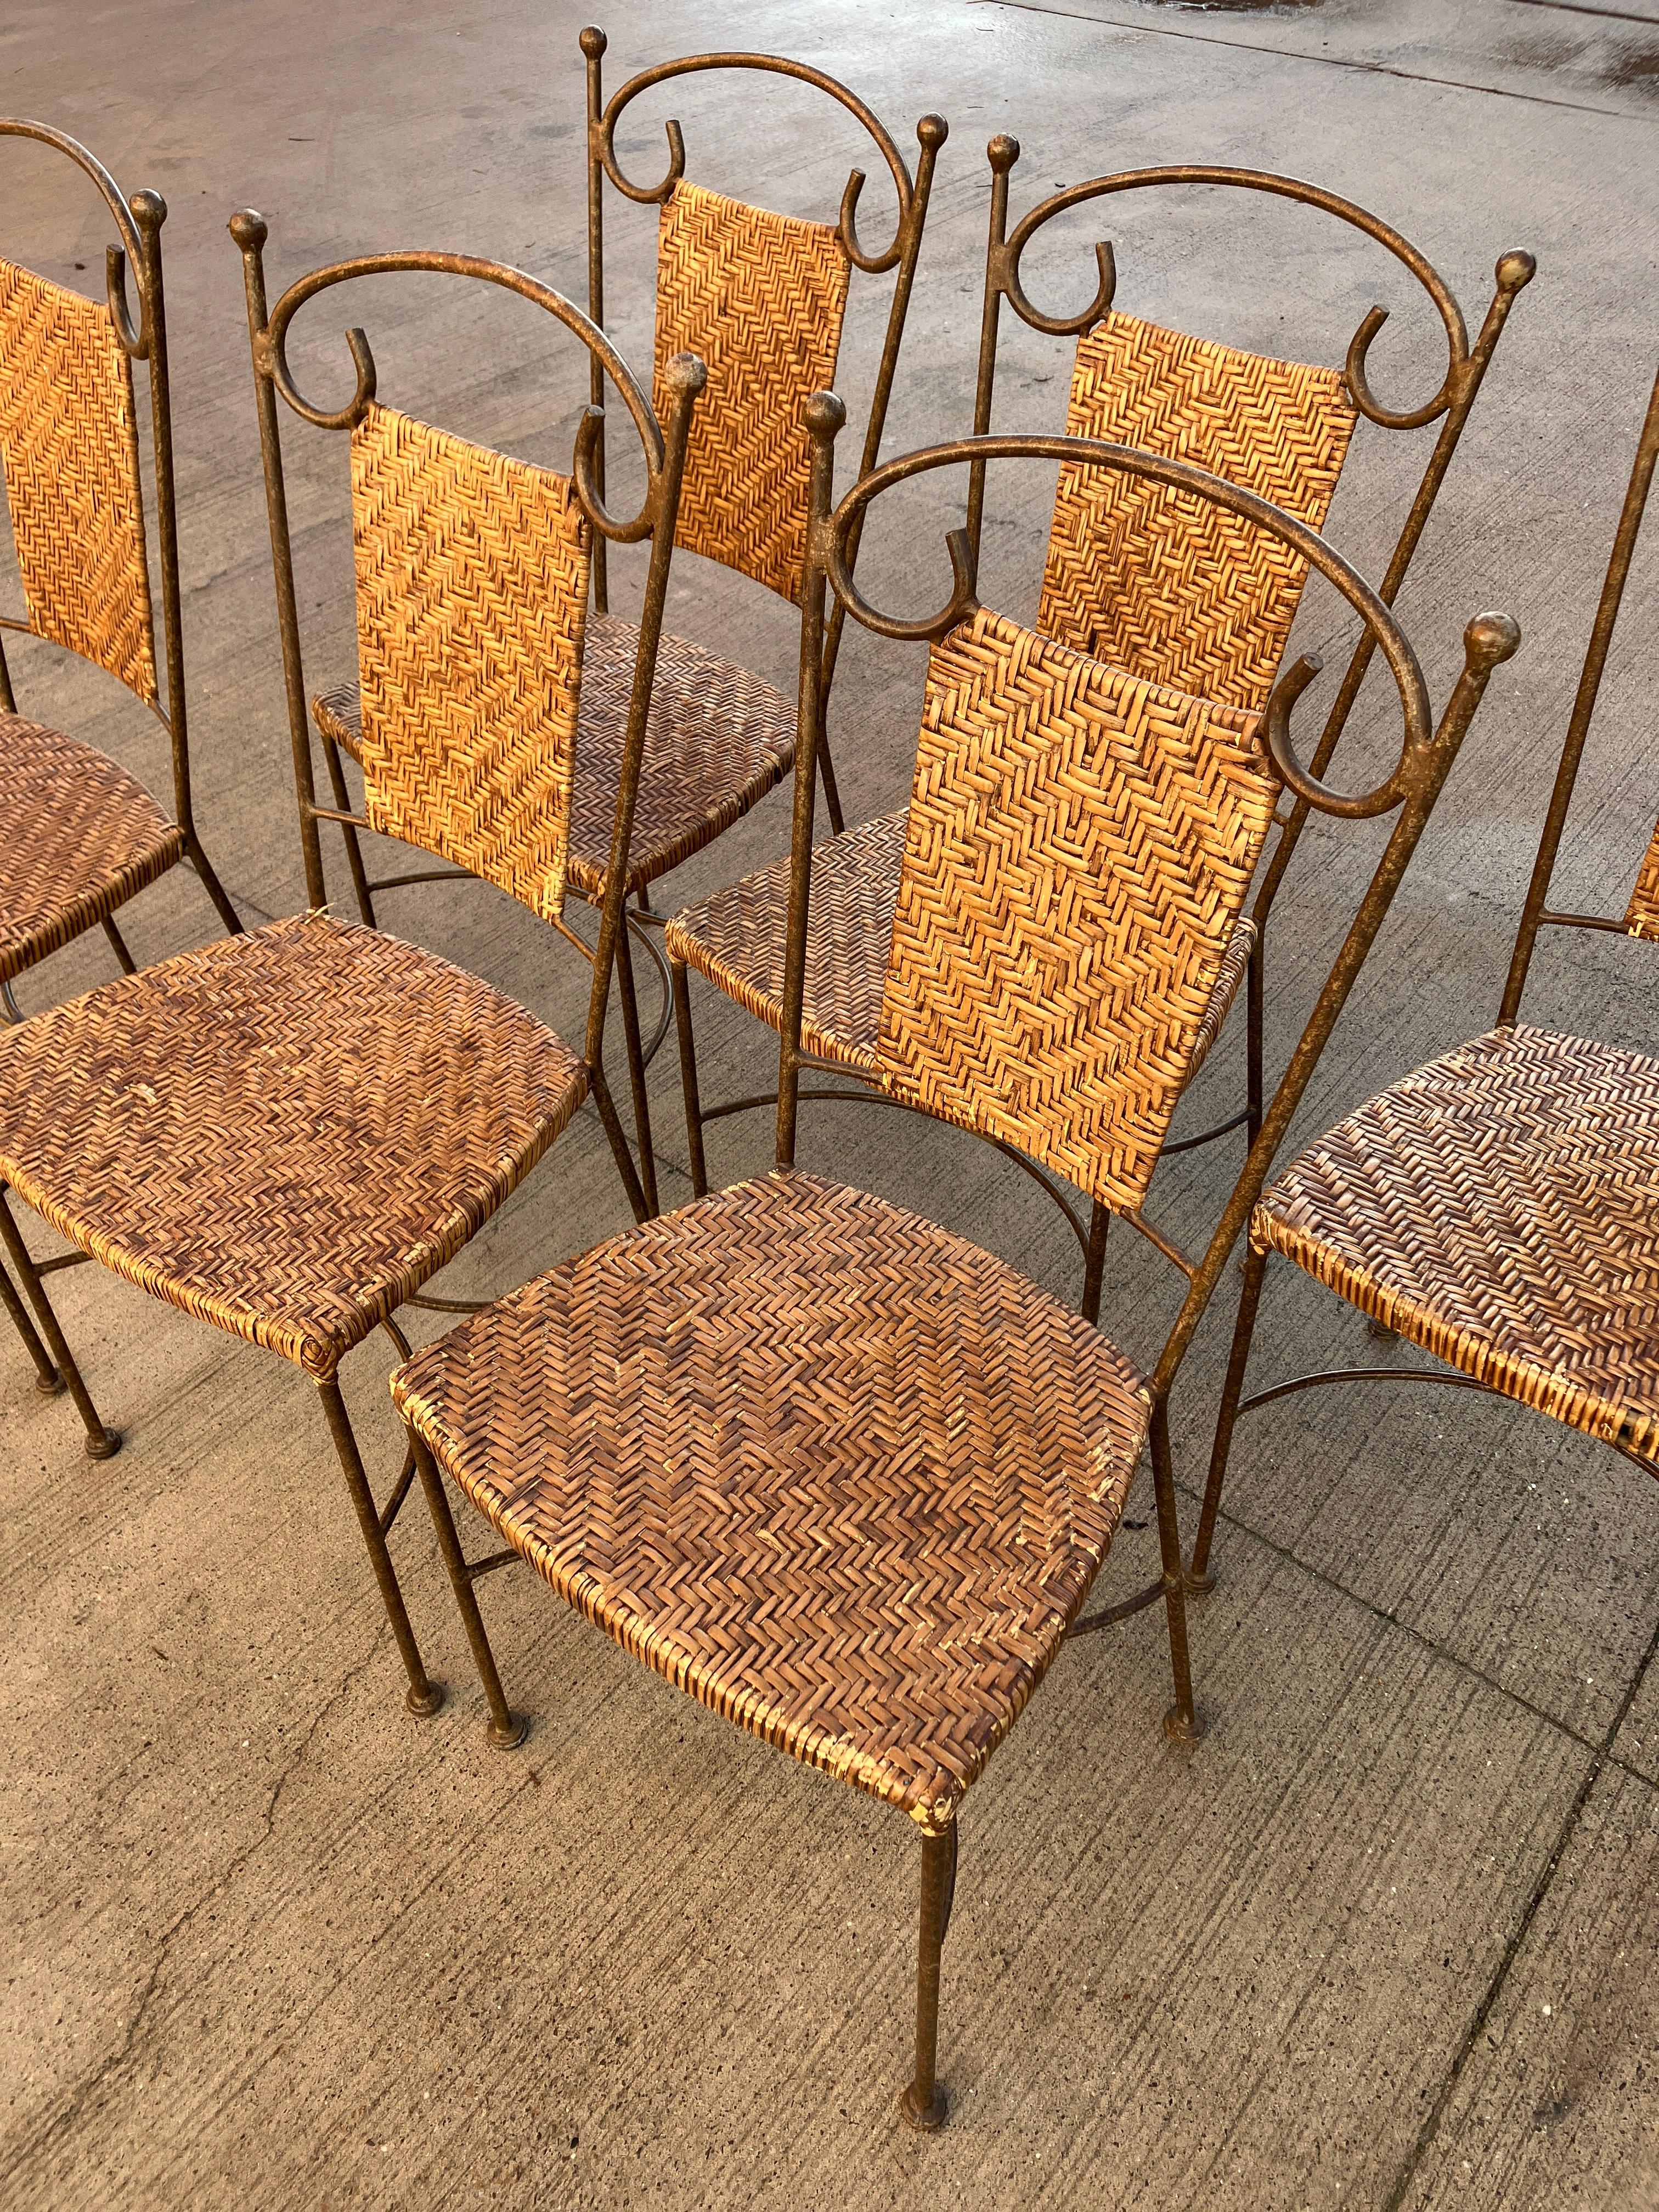 Vintage wrought Iron Dining Chairs with Wicker Seating x 6 6